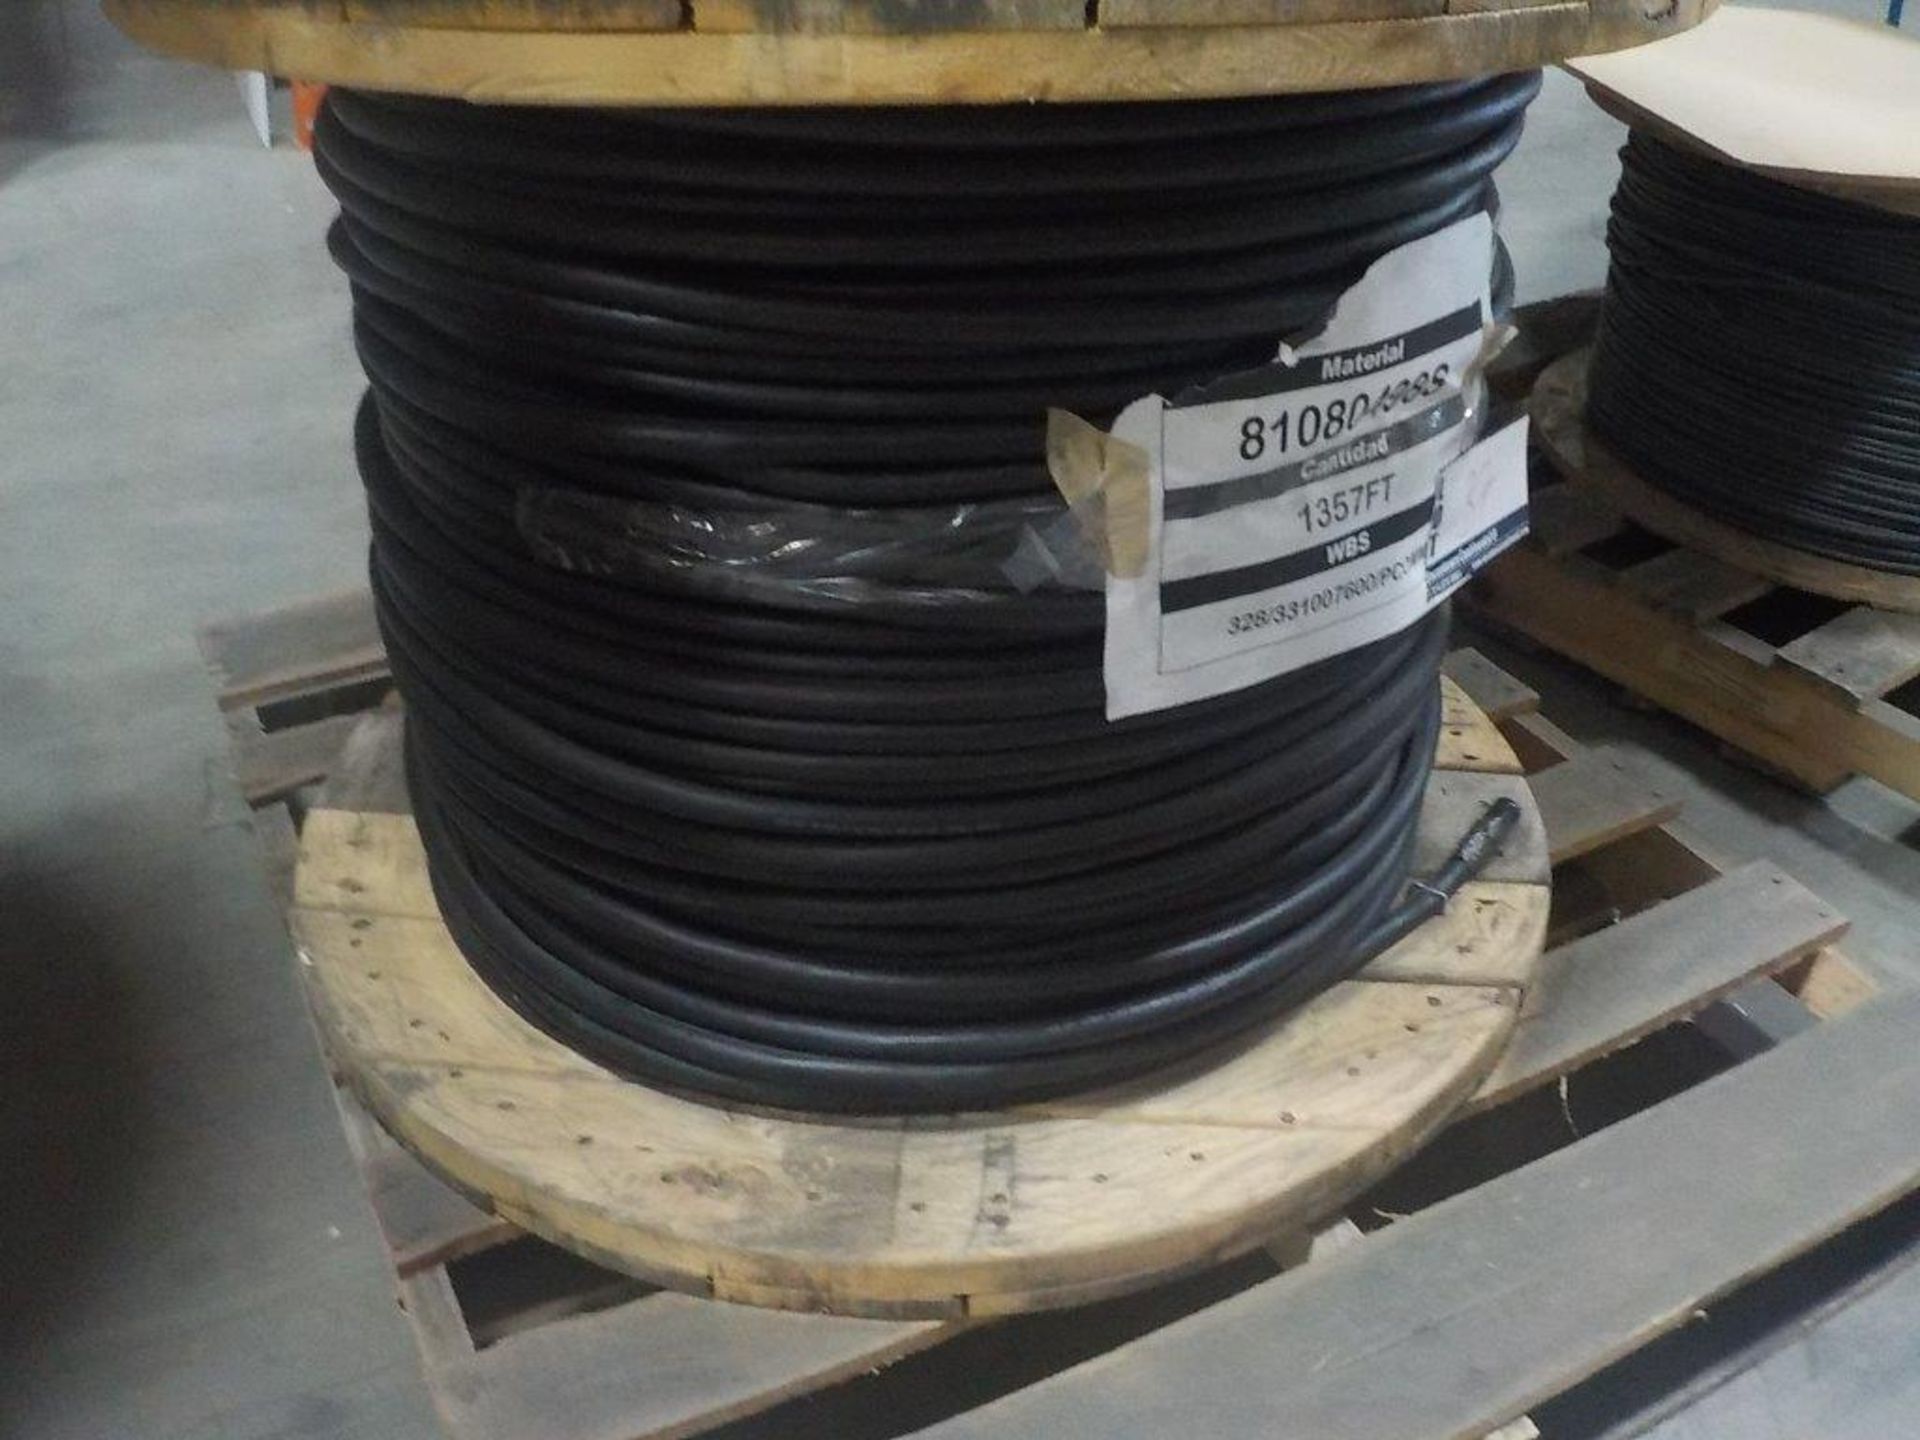 lot: wire / fils: multiconductor, 2 pr, 16 AWG, 600V, 125 celcius (1,357')